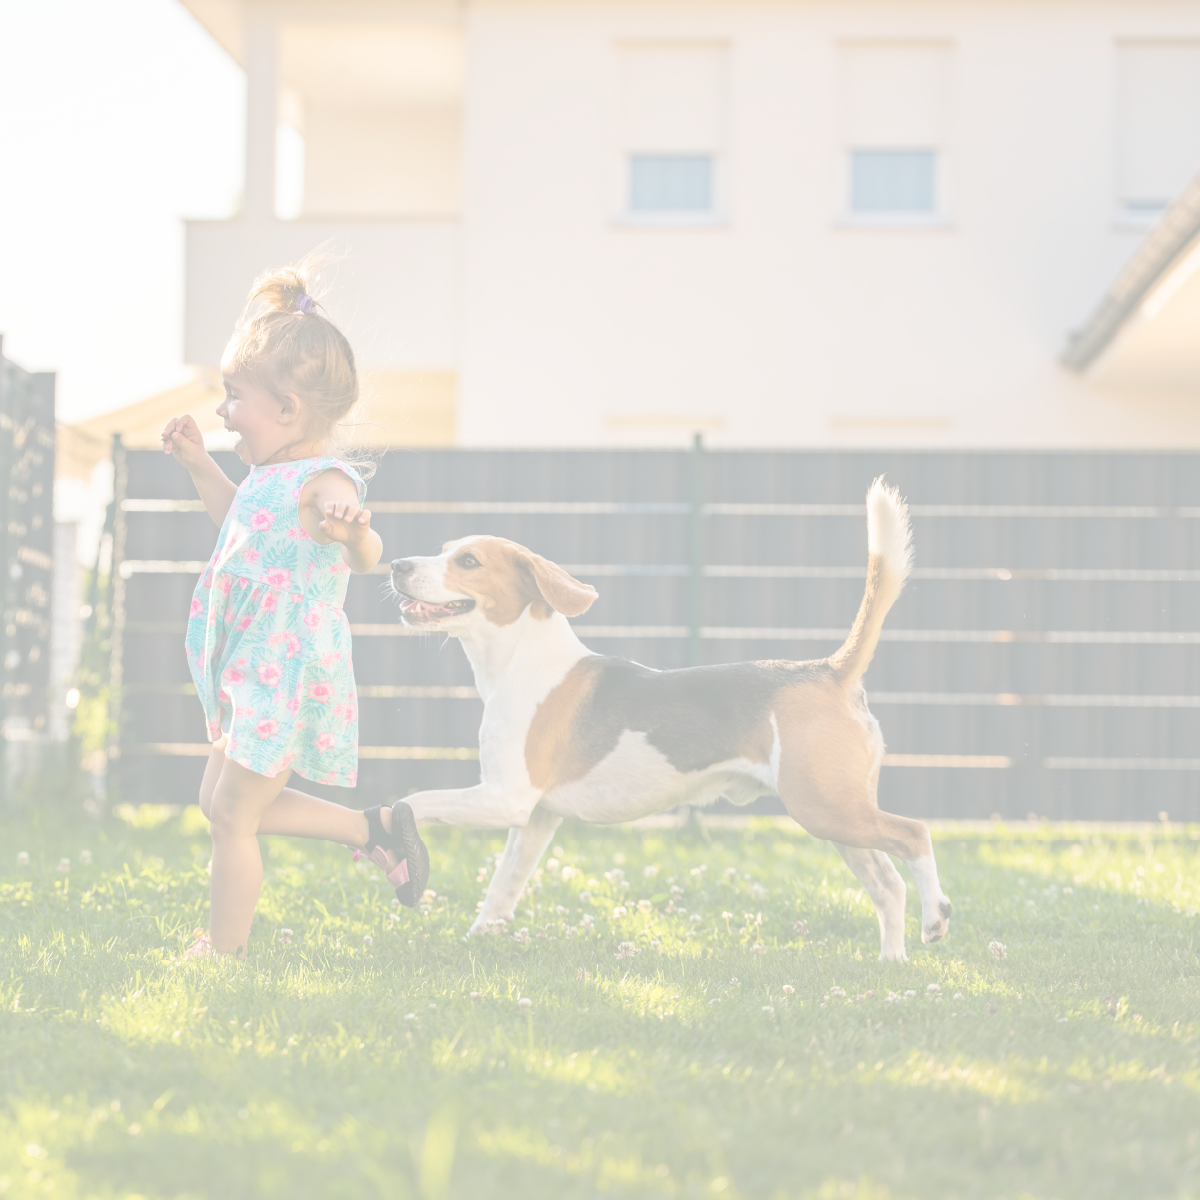 A little girl being chased by a friendly dog in a backyard